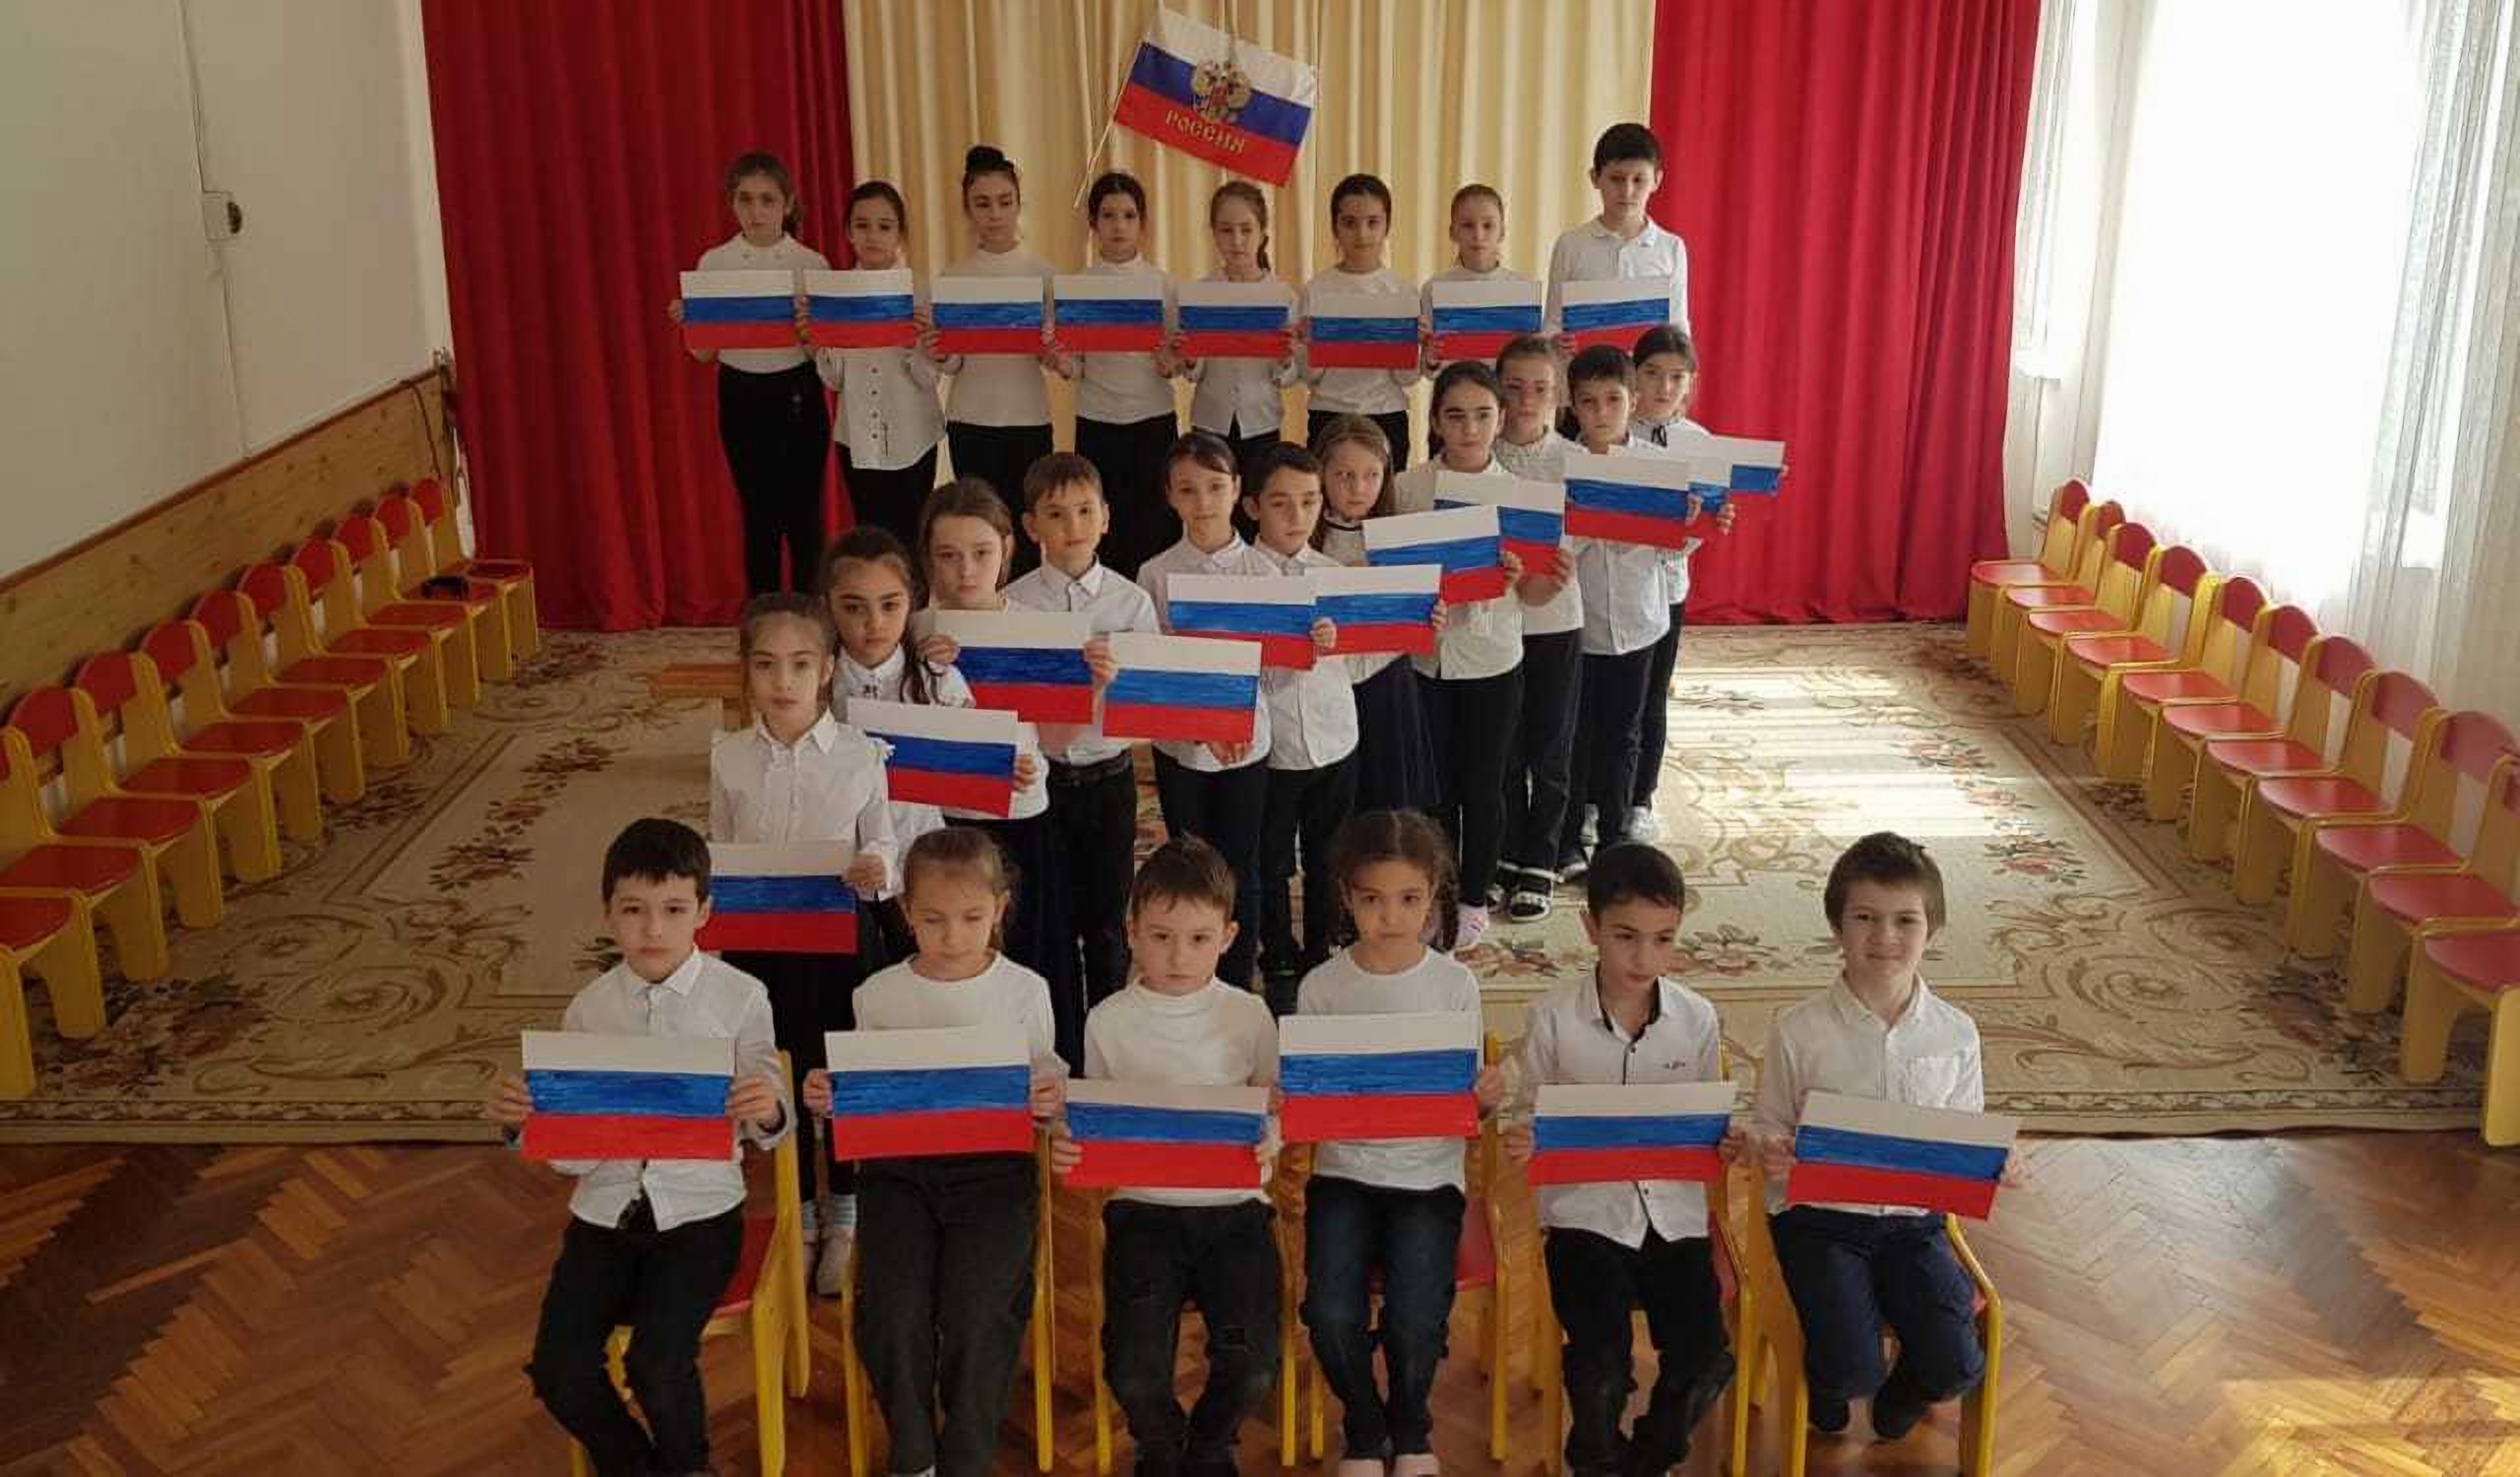 A group of children holding Russian flags standing in a way that forms the letter Z.